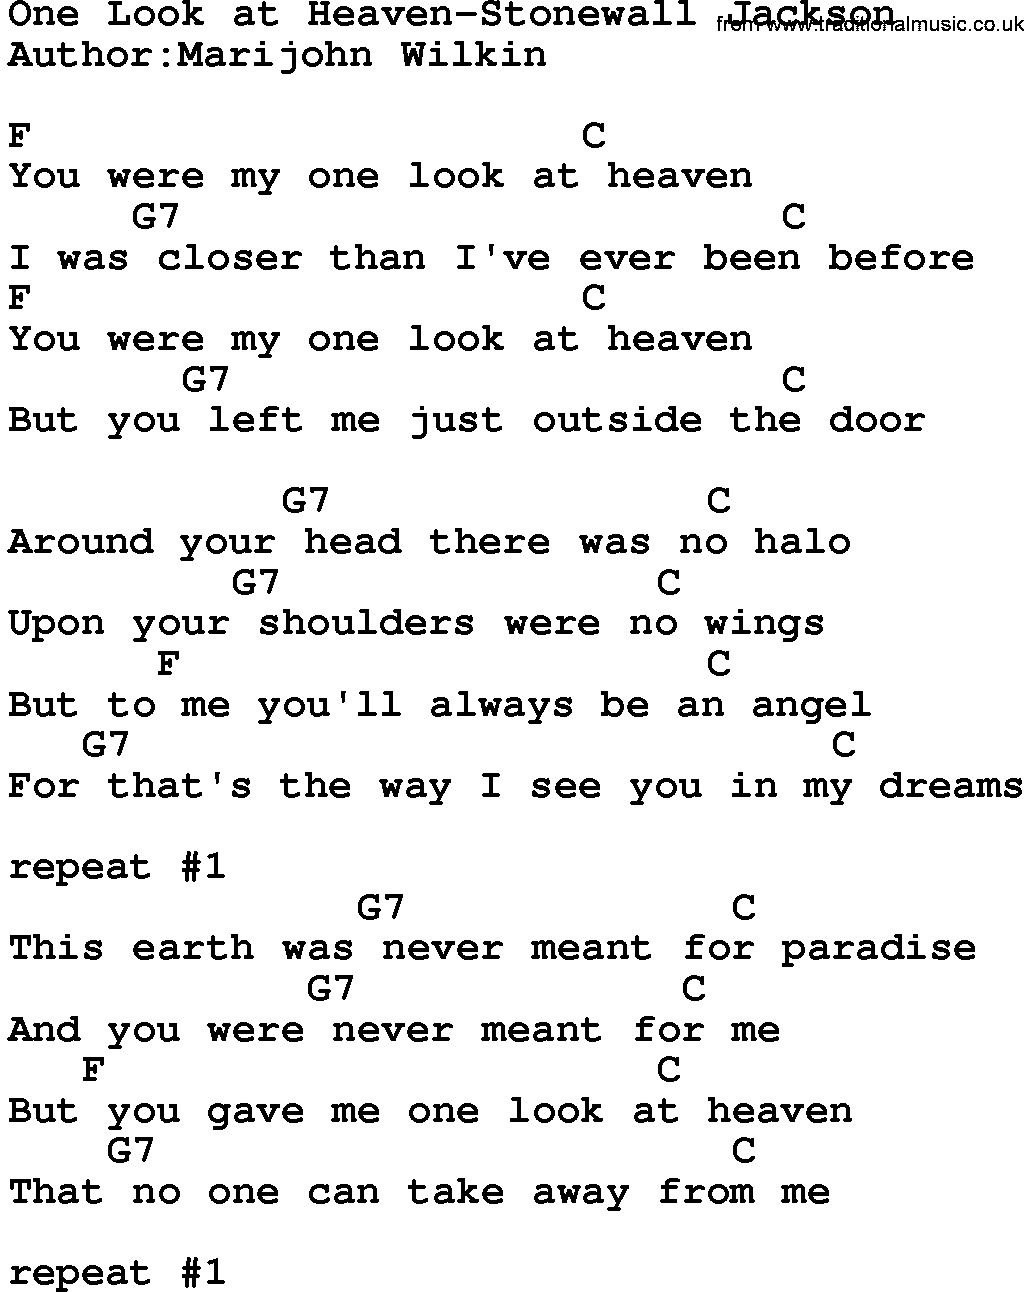 Country music song: One Look At Heaven-Stonewall Jackson lyrics and chords